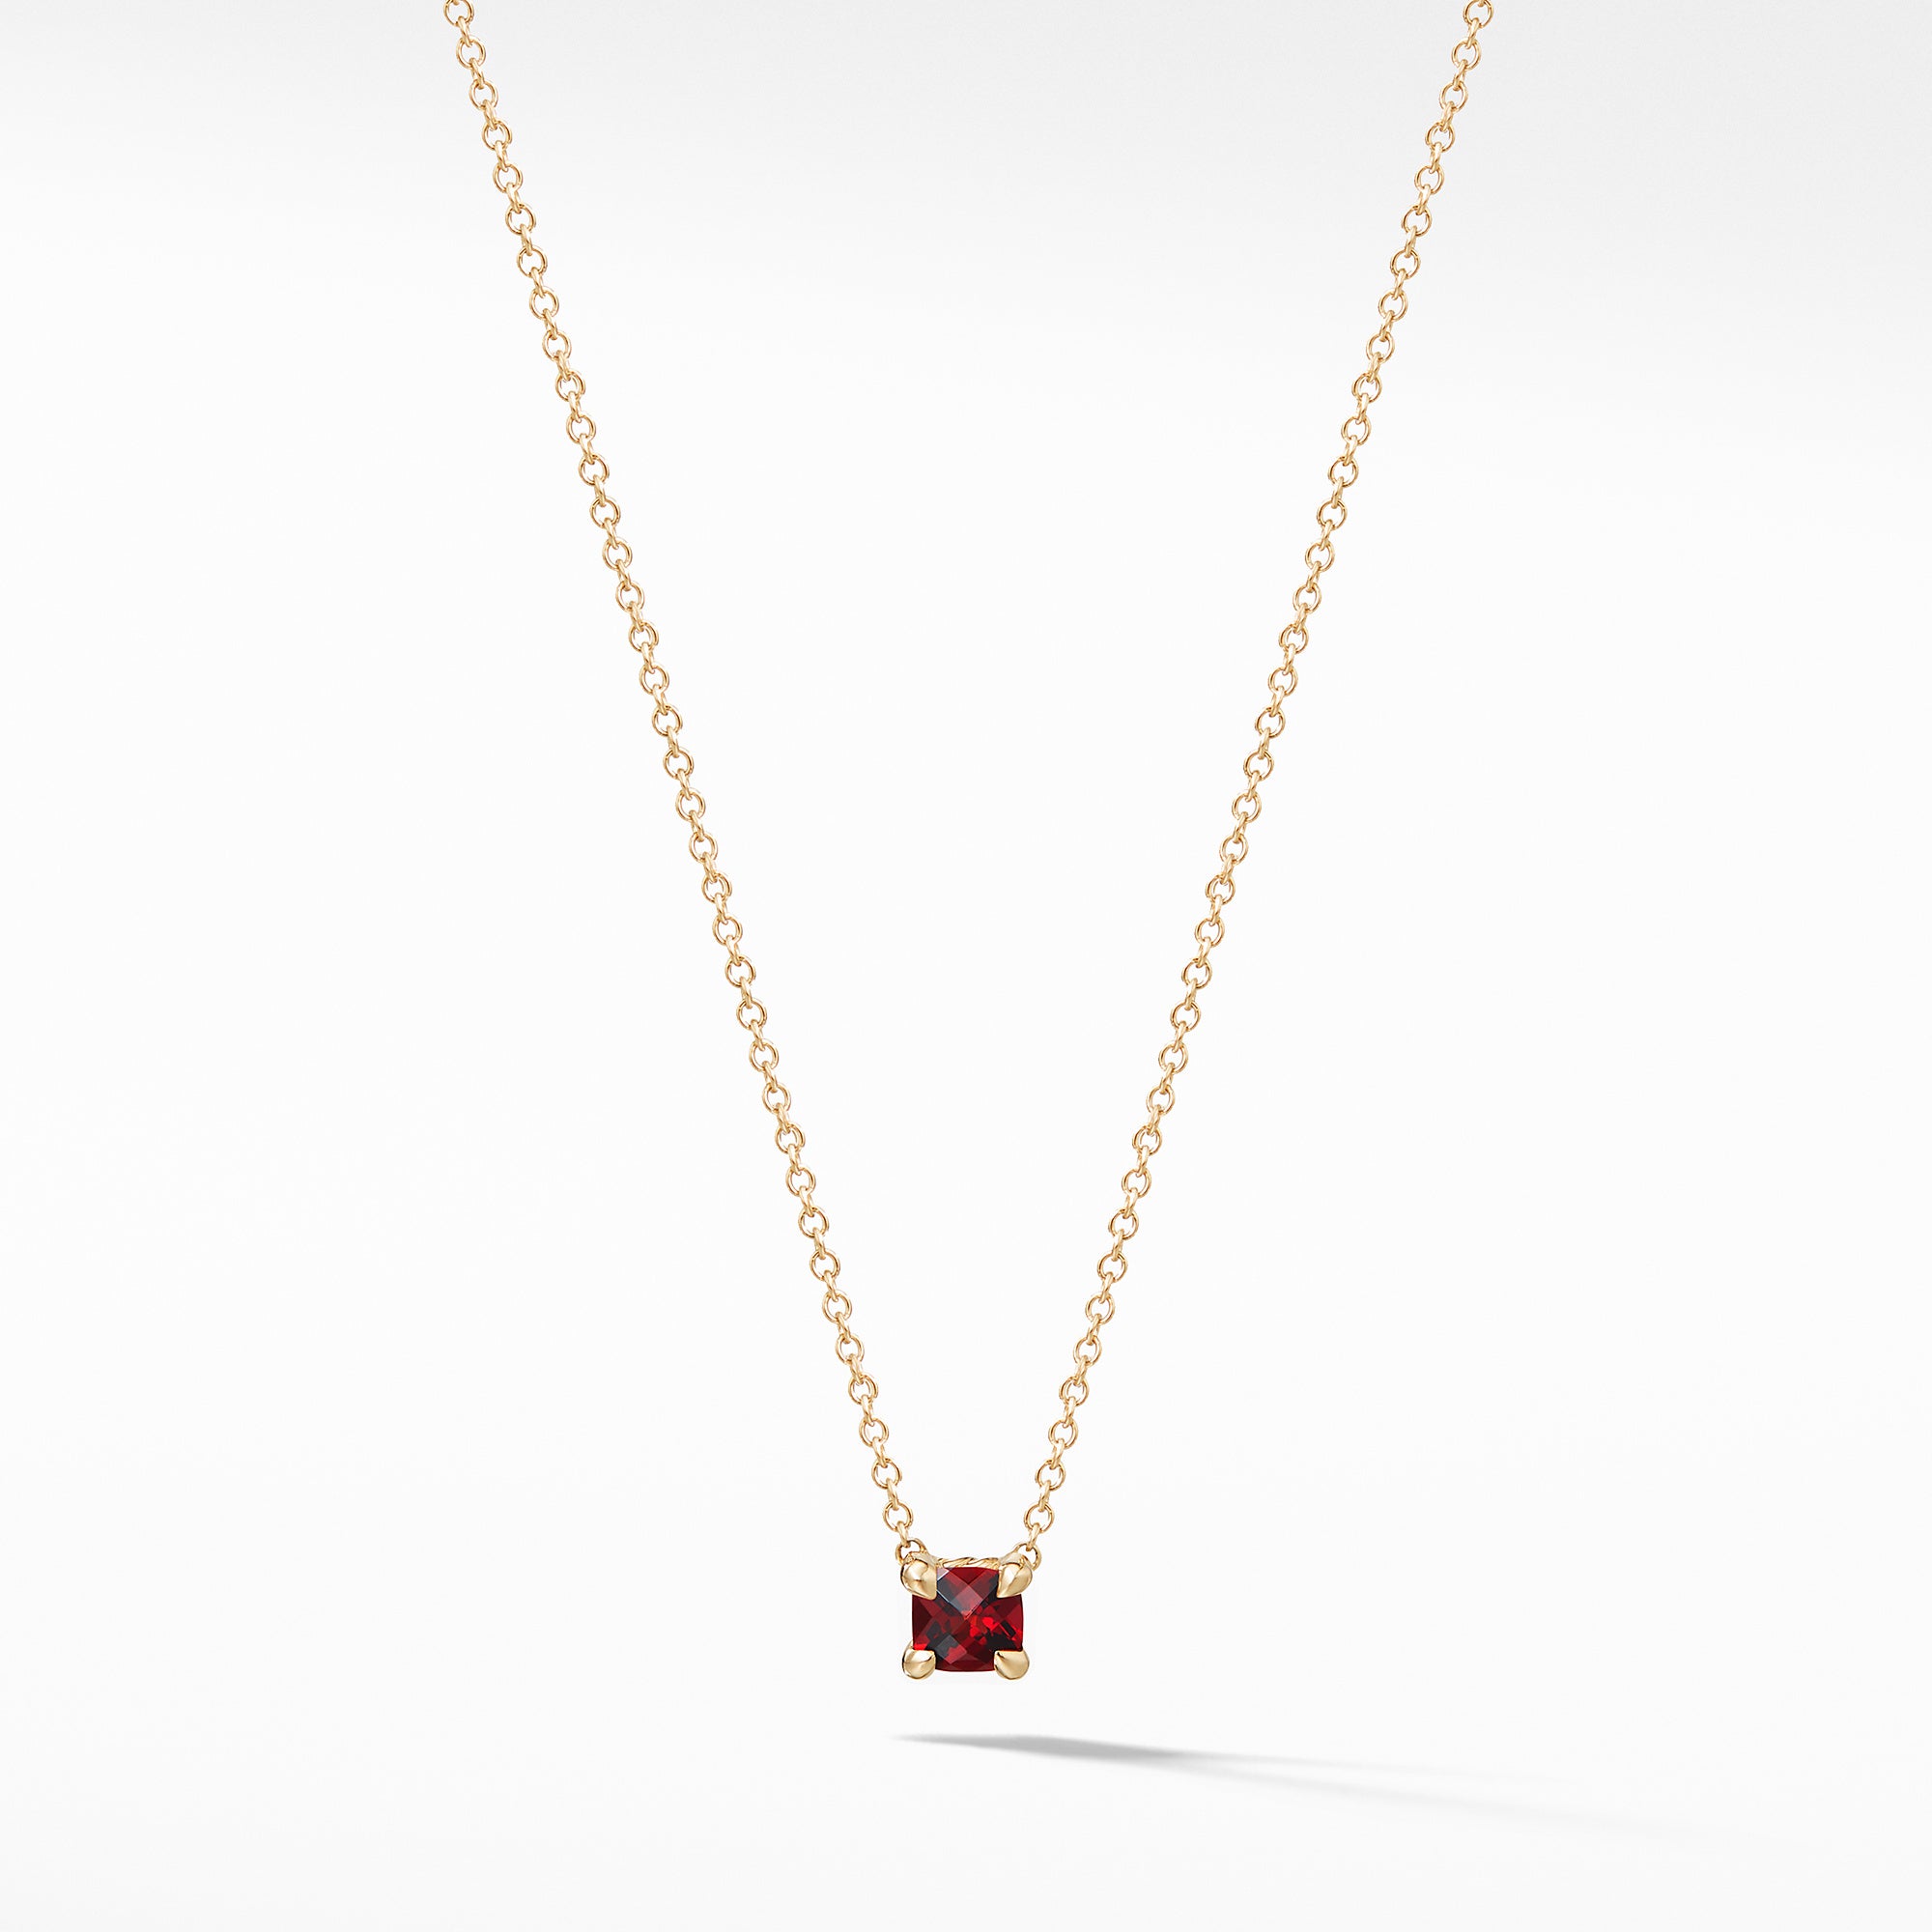 Chatelaine® Kids Necklace with Garnet in 18K Gold, 4mm